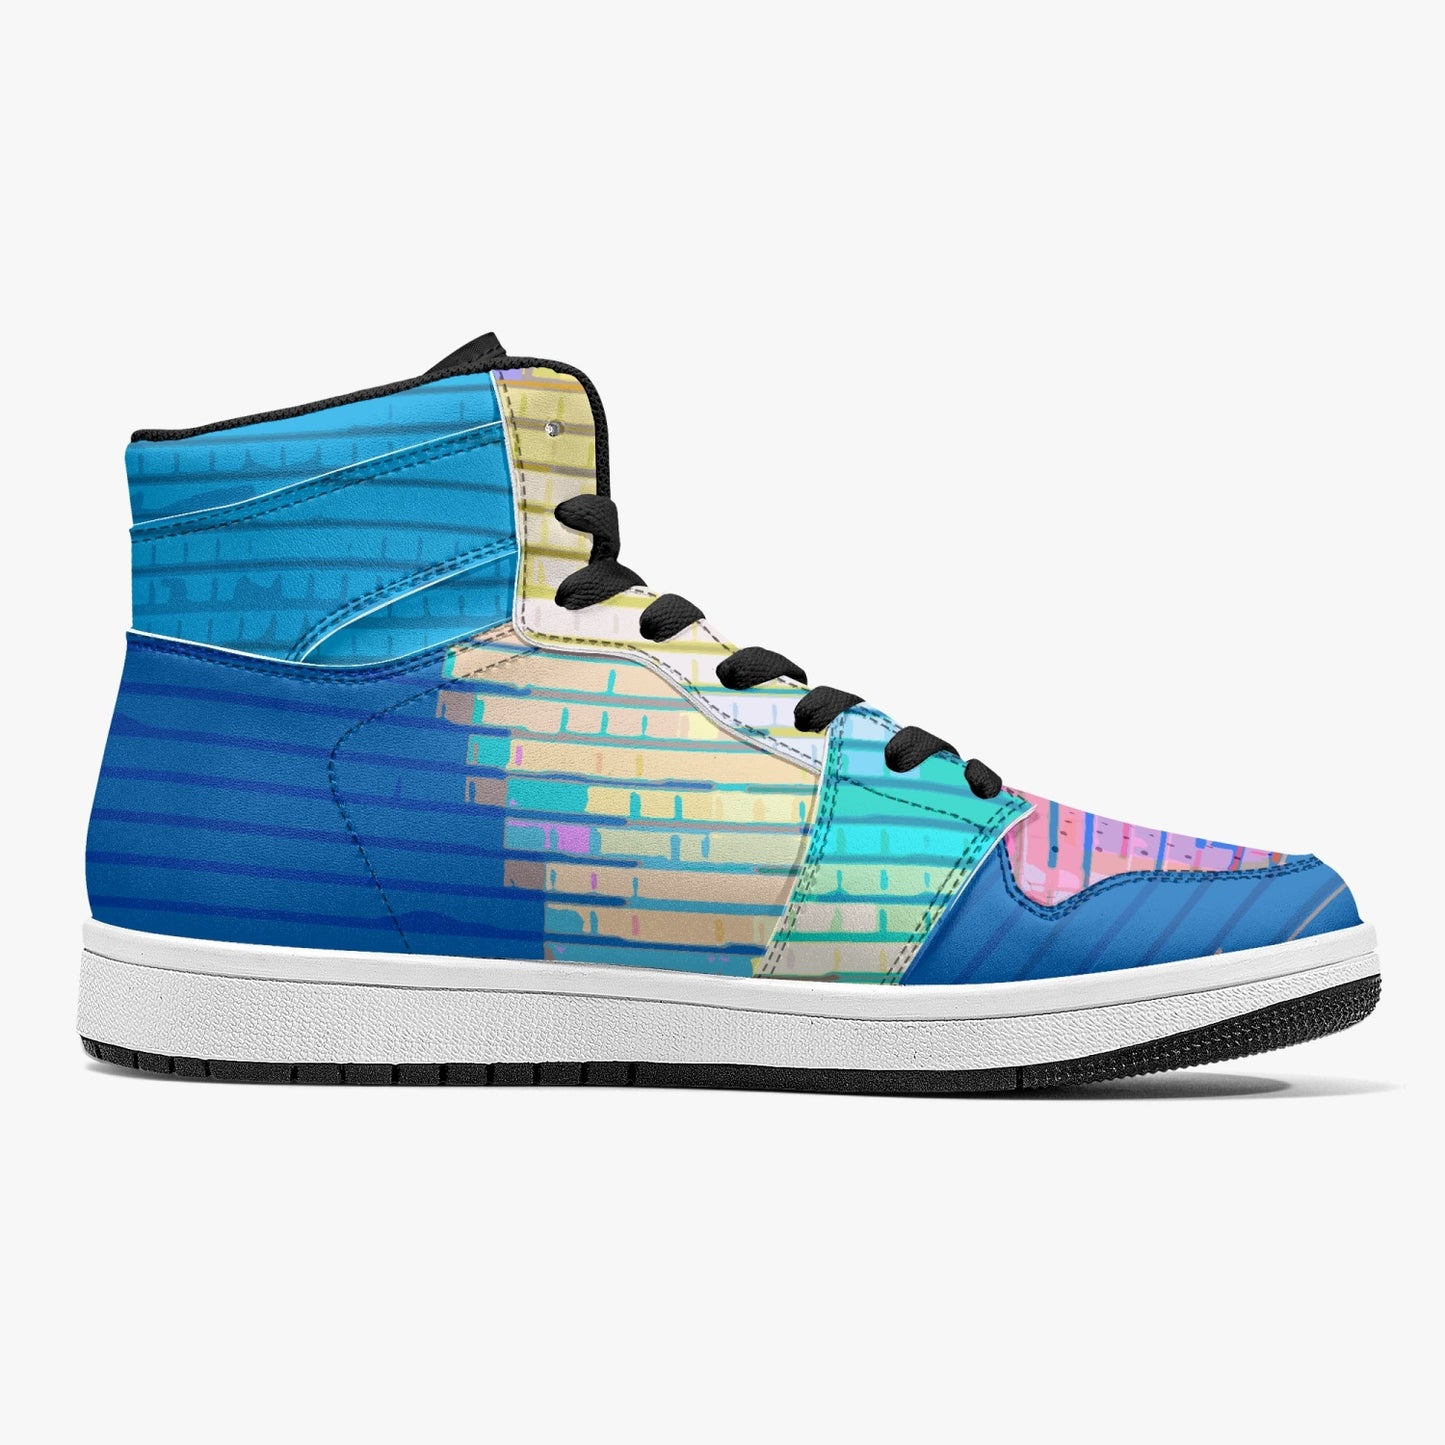 Almost Blue I - Macr.in (High-Top Leather Sneakers)